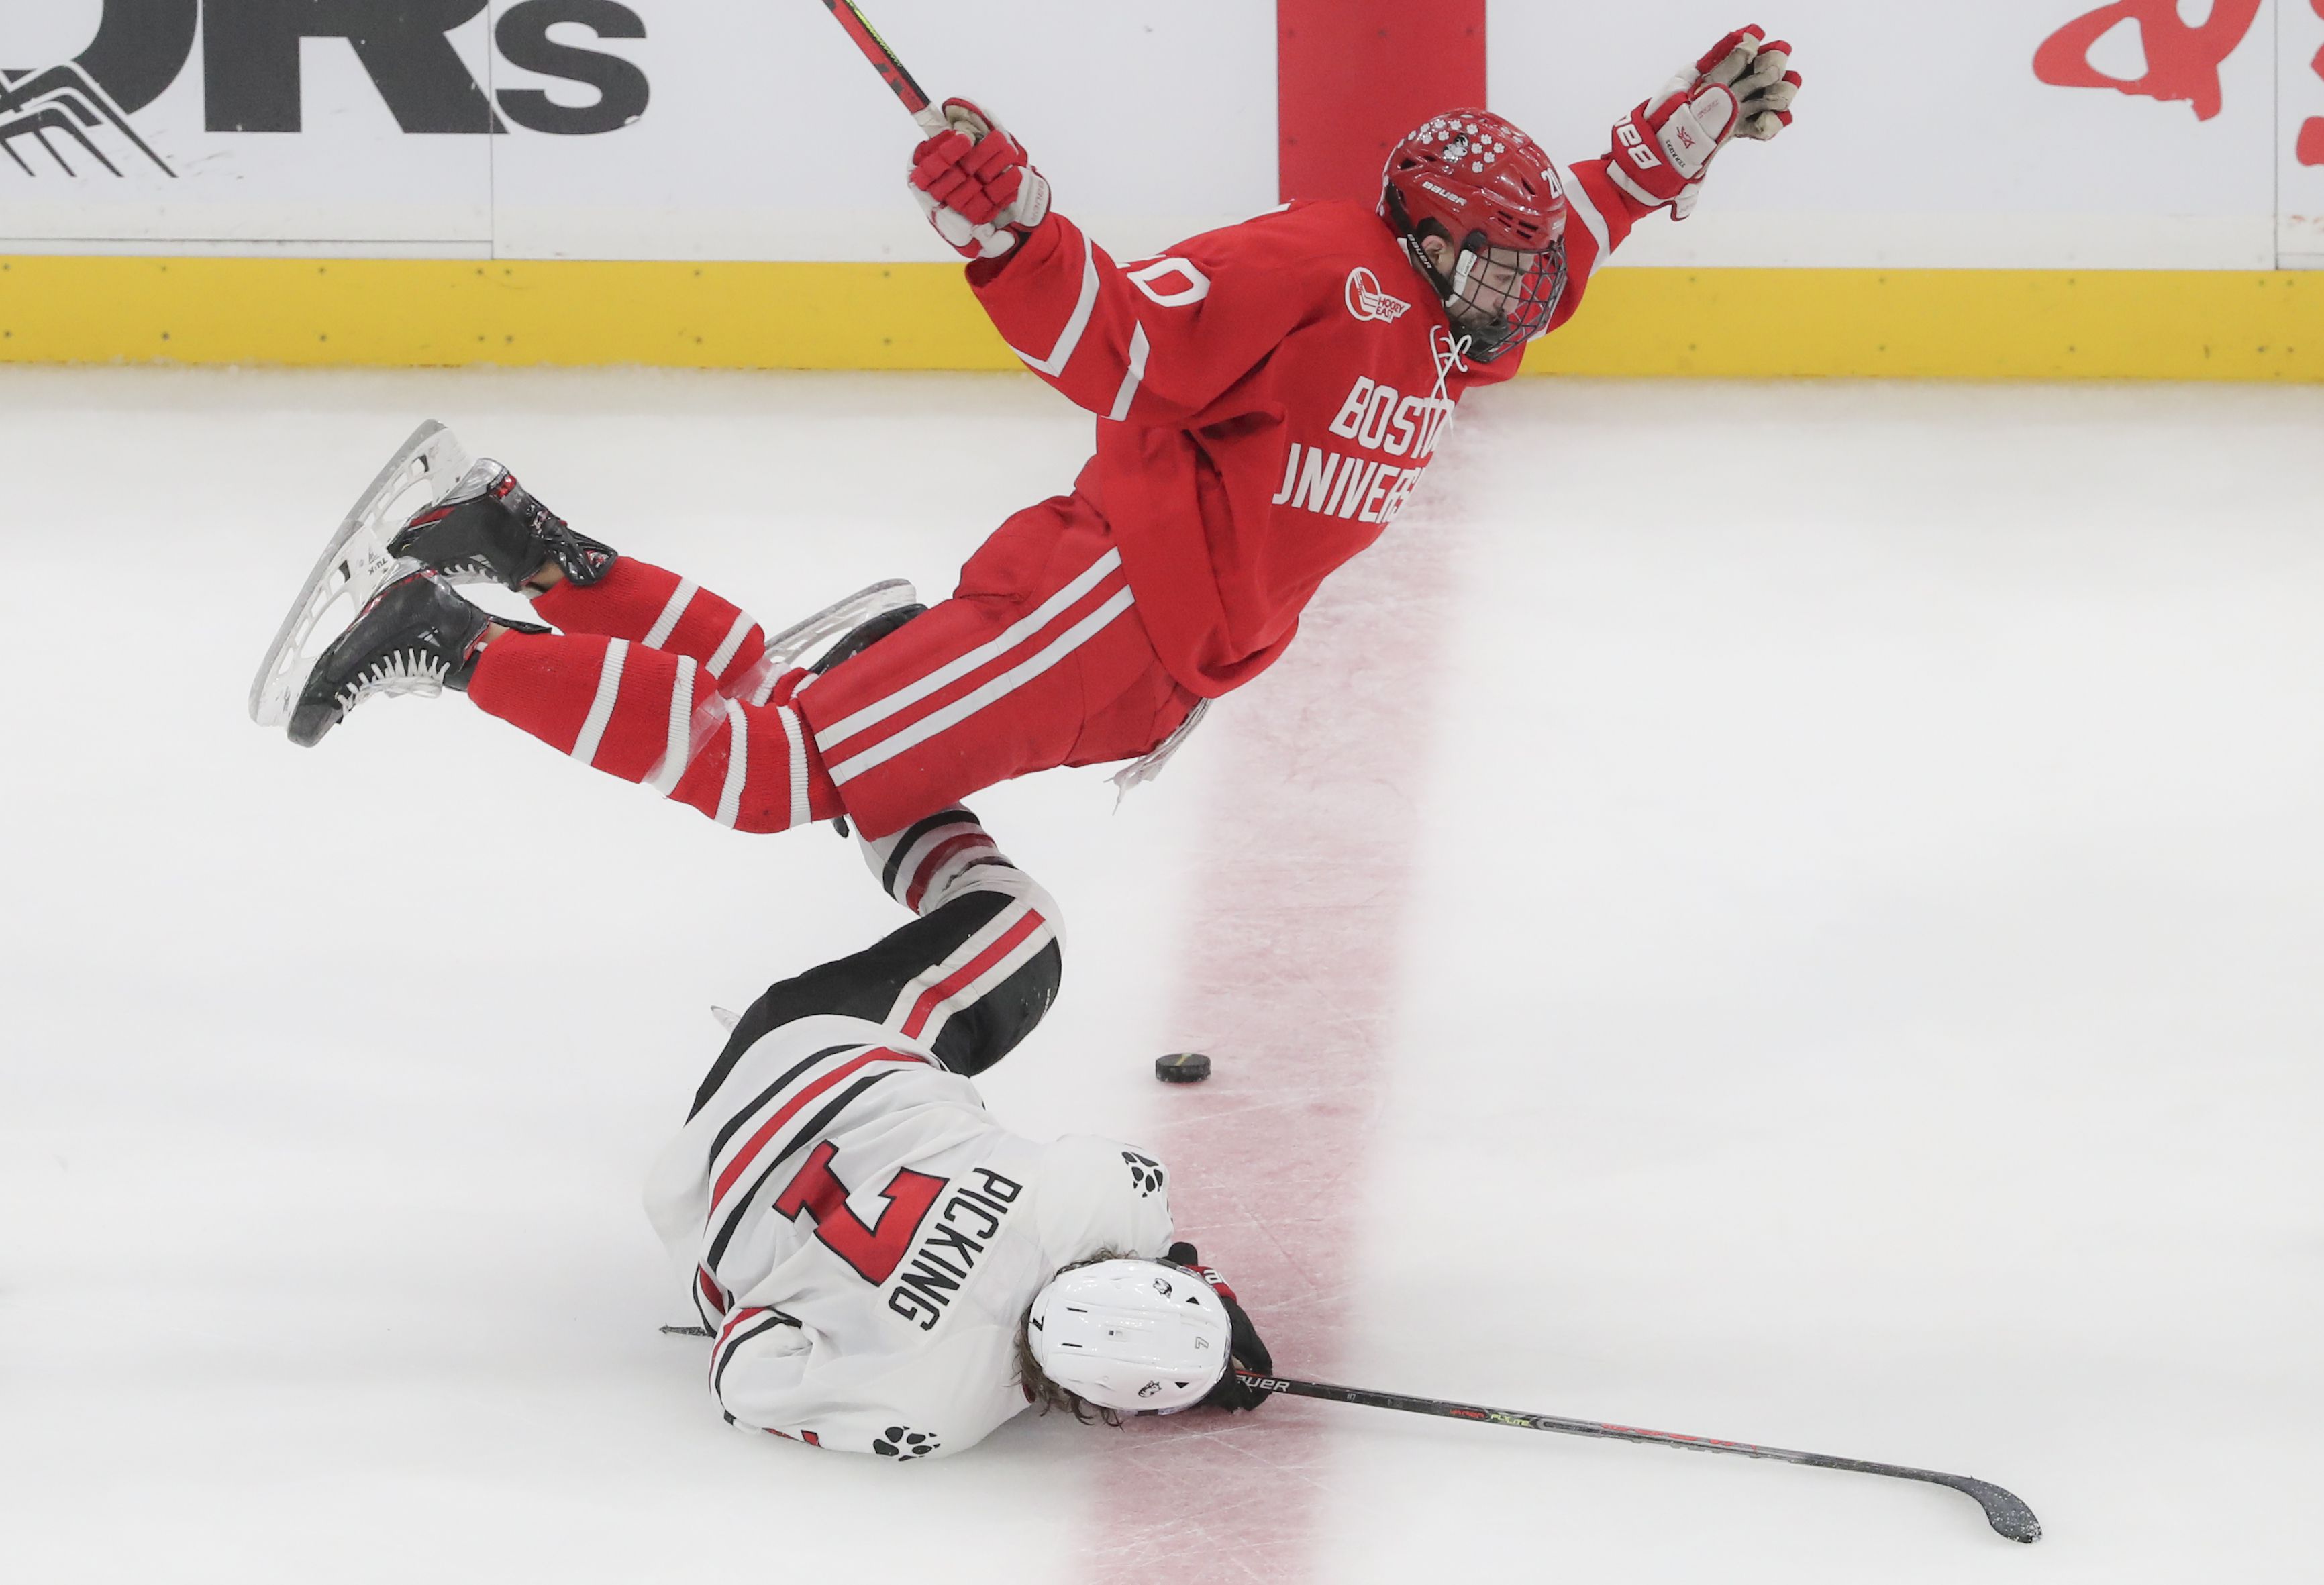 Boston University's Trevor Zegras (13) celebrates his goal as Northeastern  players look on during the first period of the Beanpot Tournament  championship NCAA college hockey game in Boston, Monday, Feb. 10, 2020. (